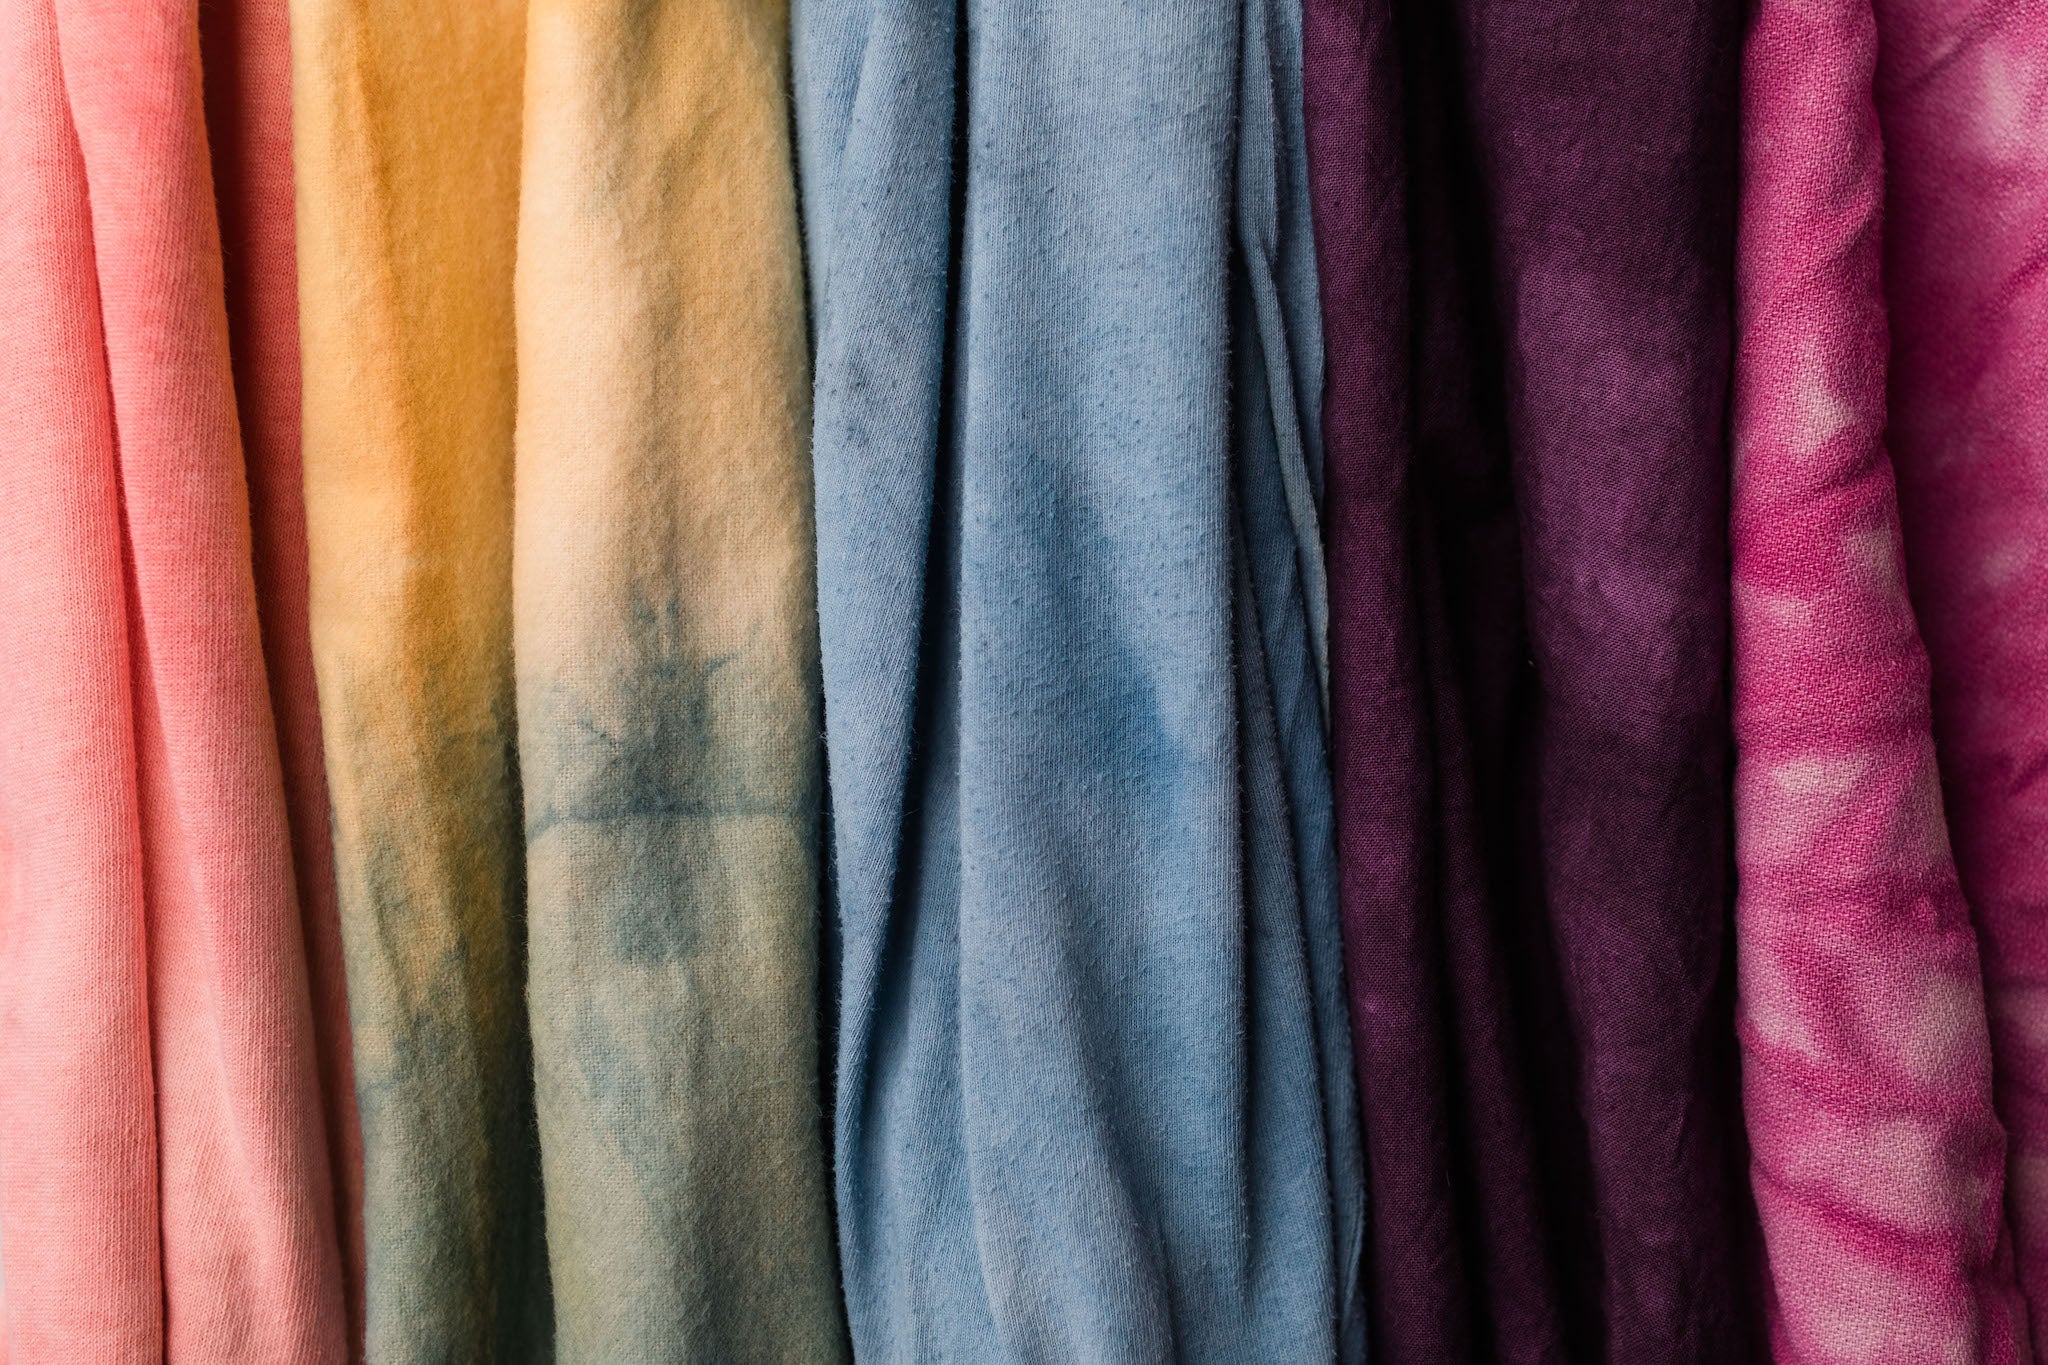 Make a Rainbow with Natural Dyes